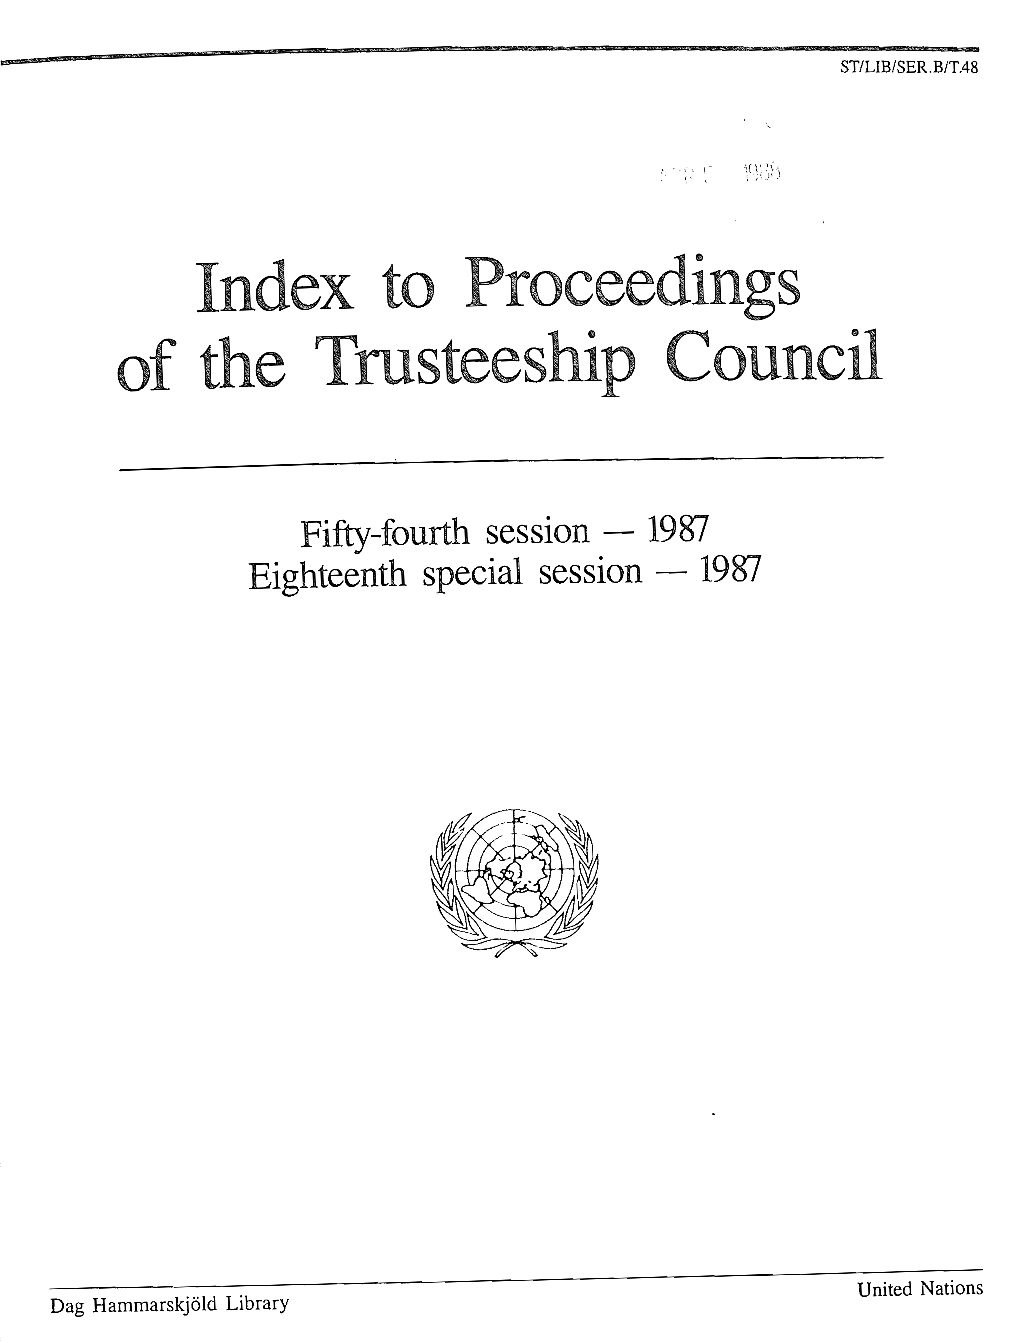 Index to Proceedings of the Trusteeship Council, 1987